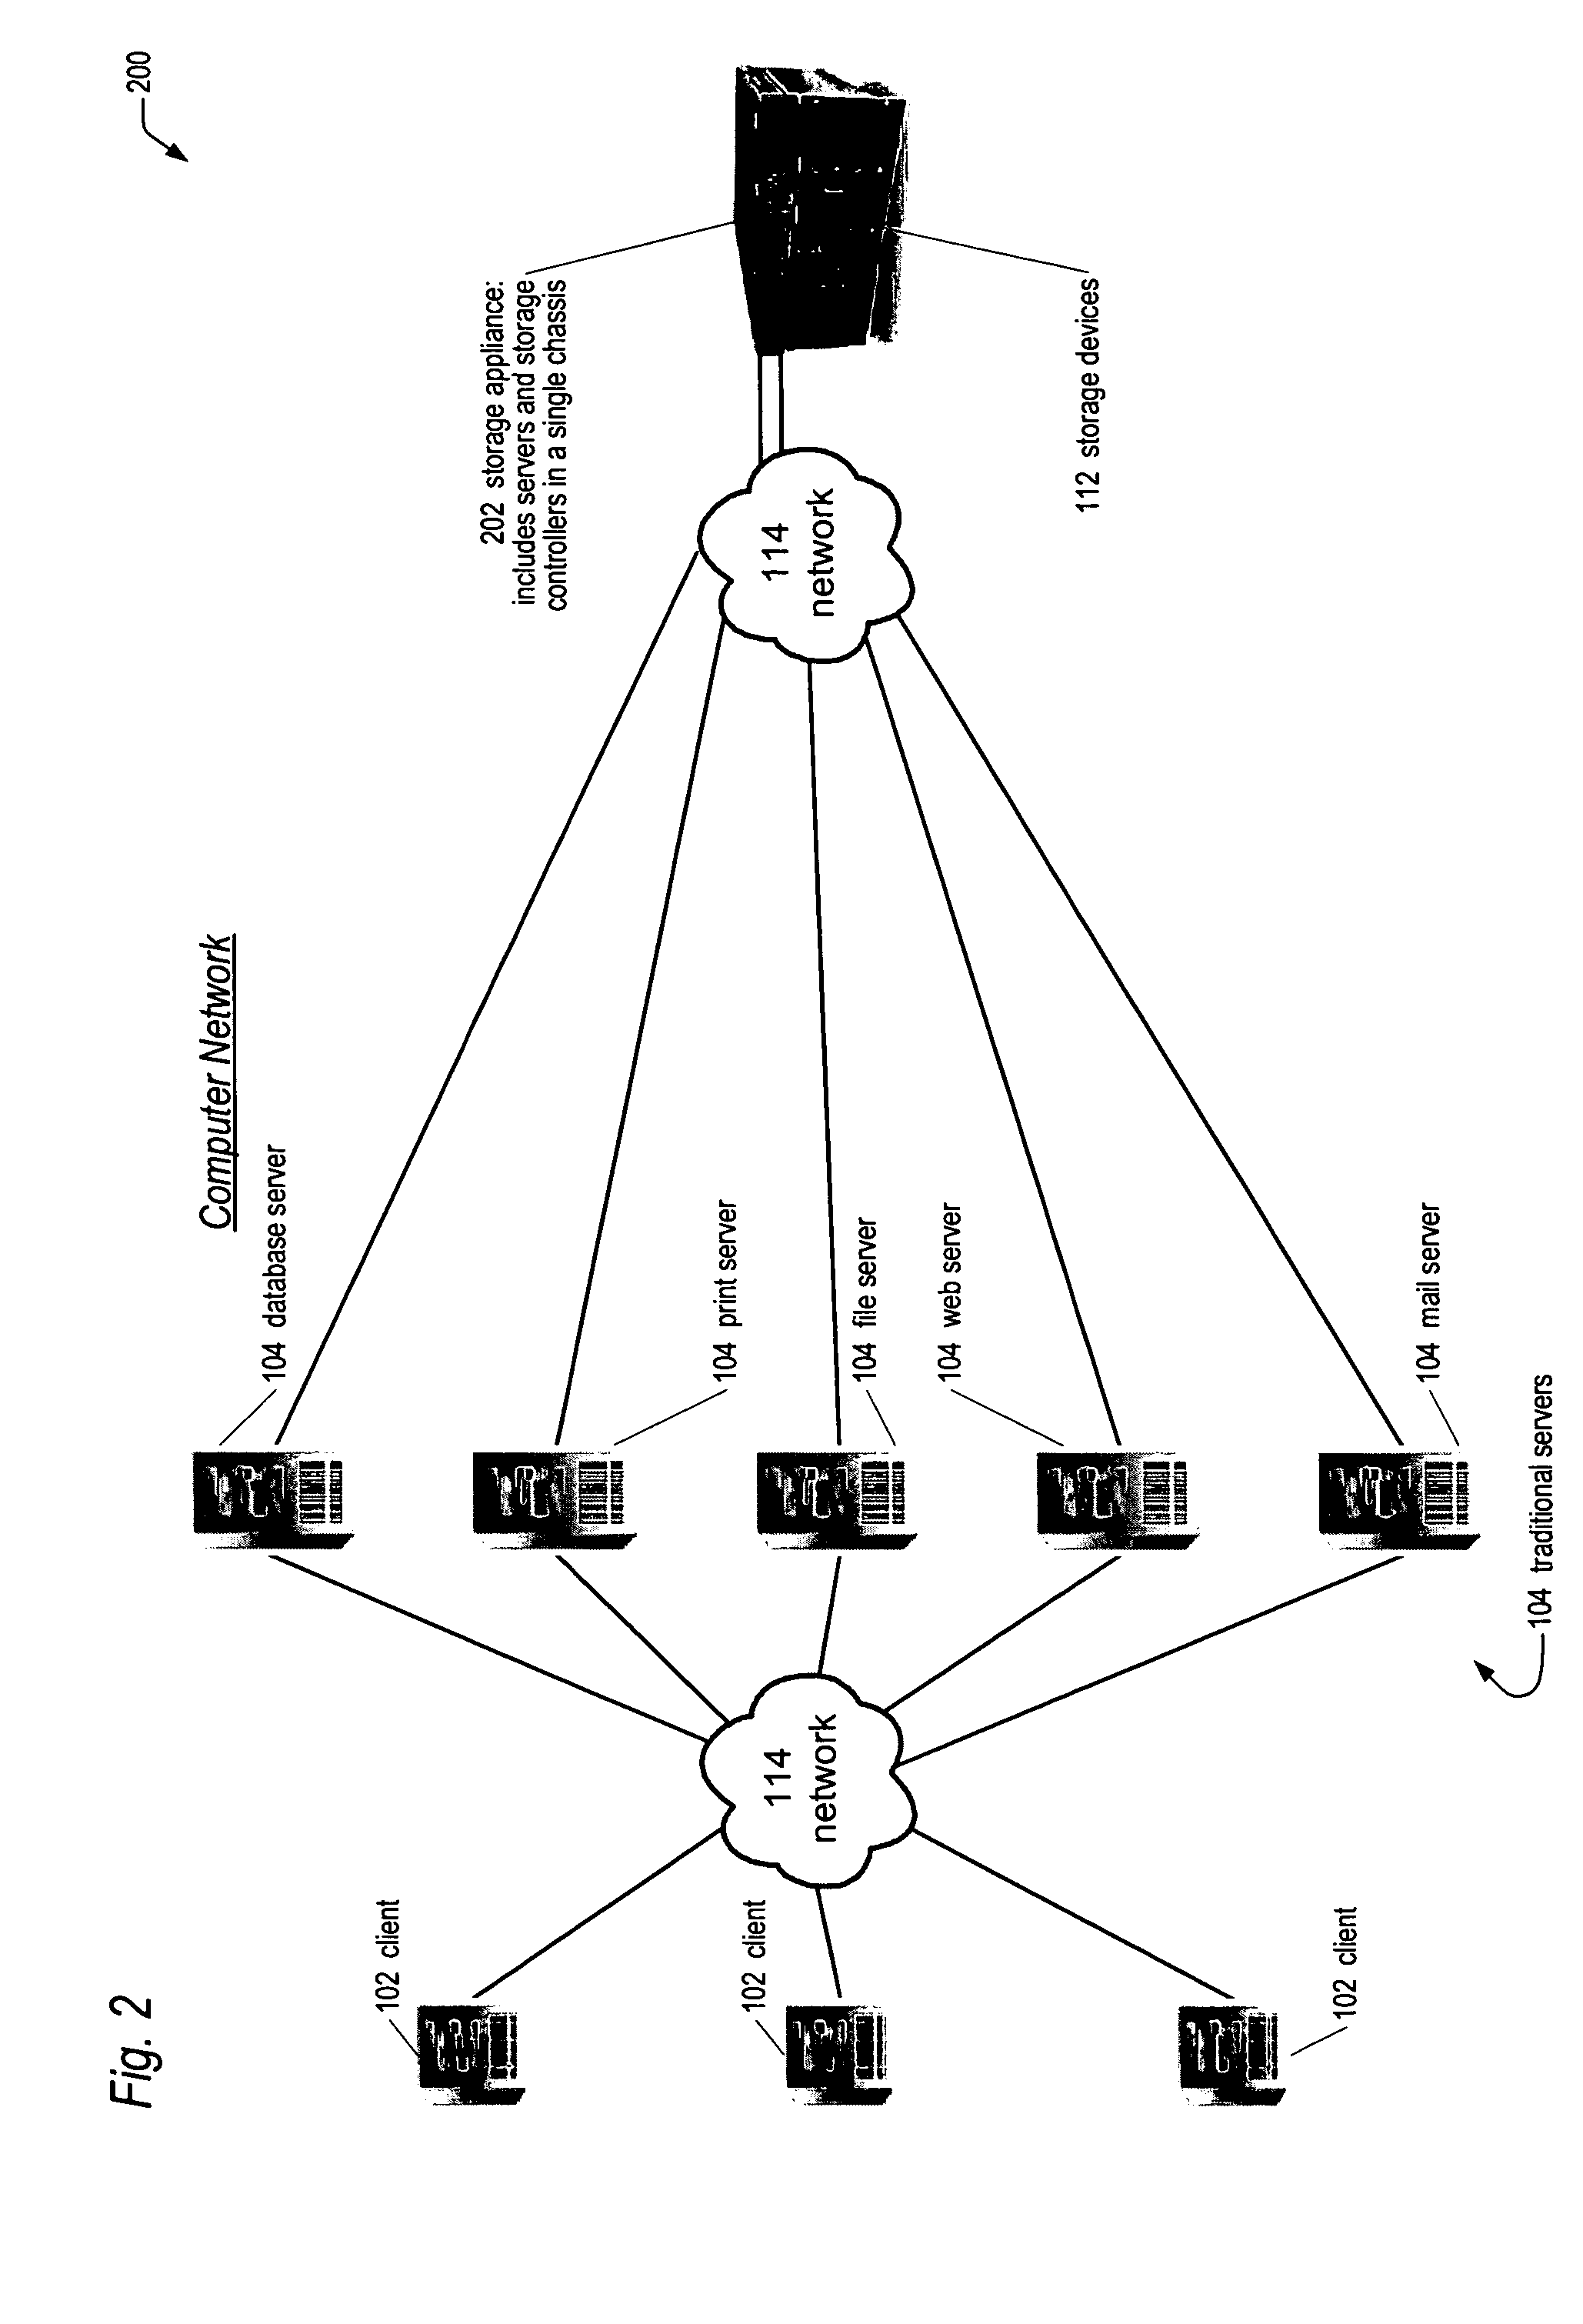 Apparatus and method for a server deterministically killing a redundant server integrated within the same network storage appliance chassis